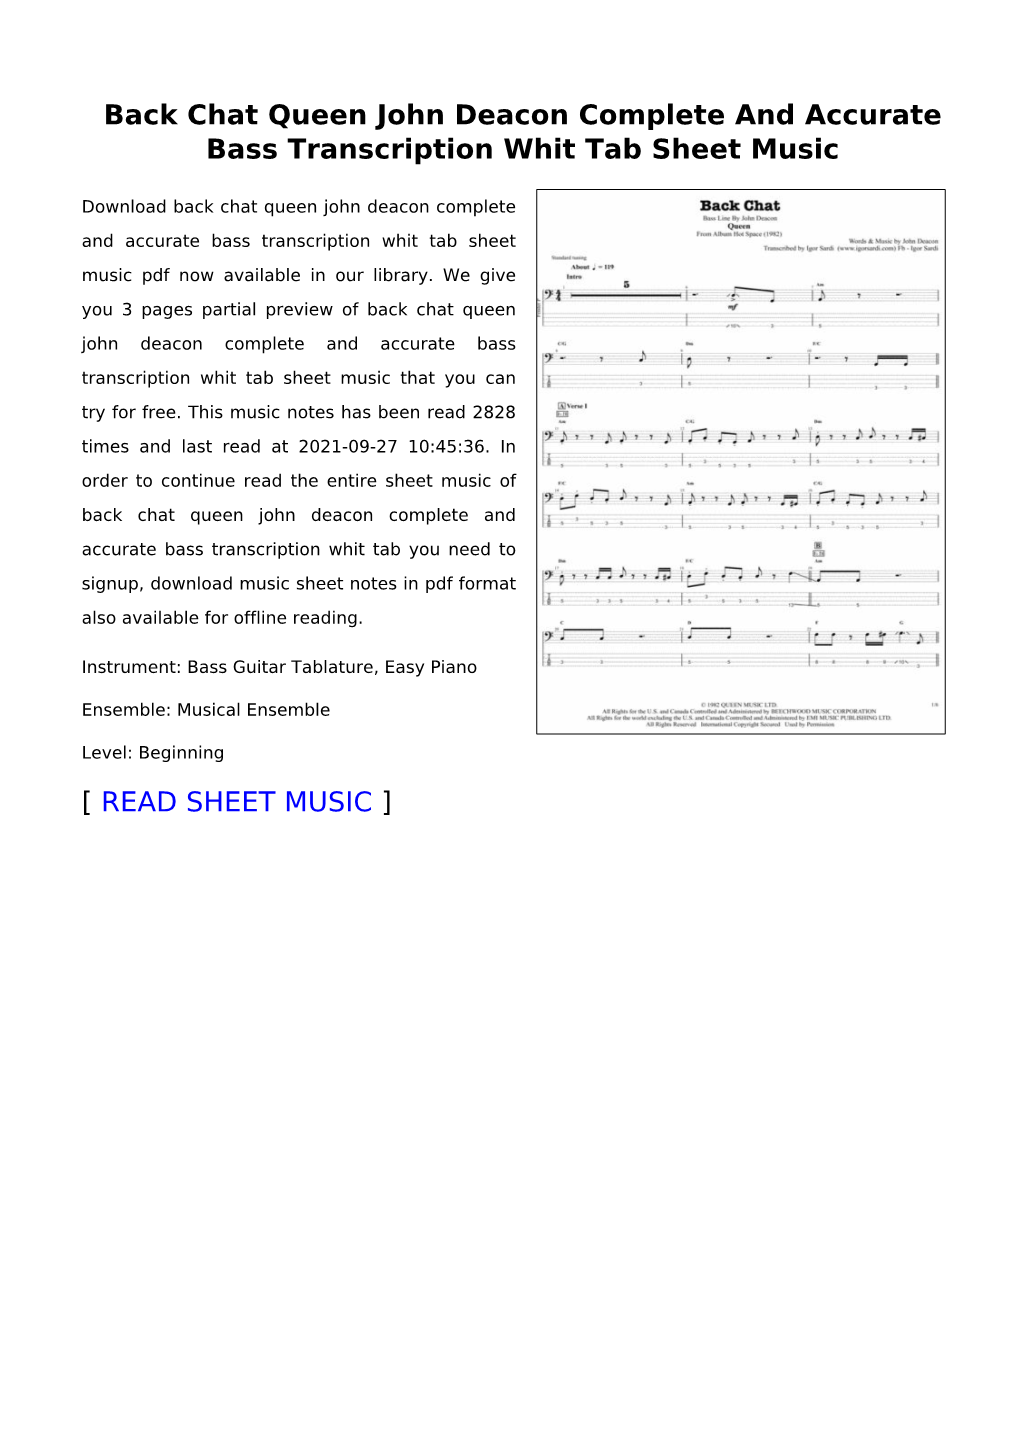 Back Chat Queen John Deacon Complete and Accurate Bass Transcription Whit Tab Sheet Music